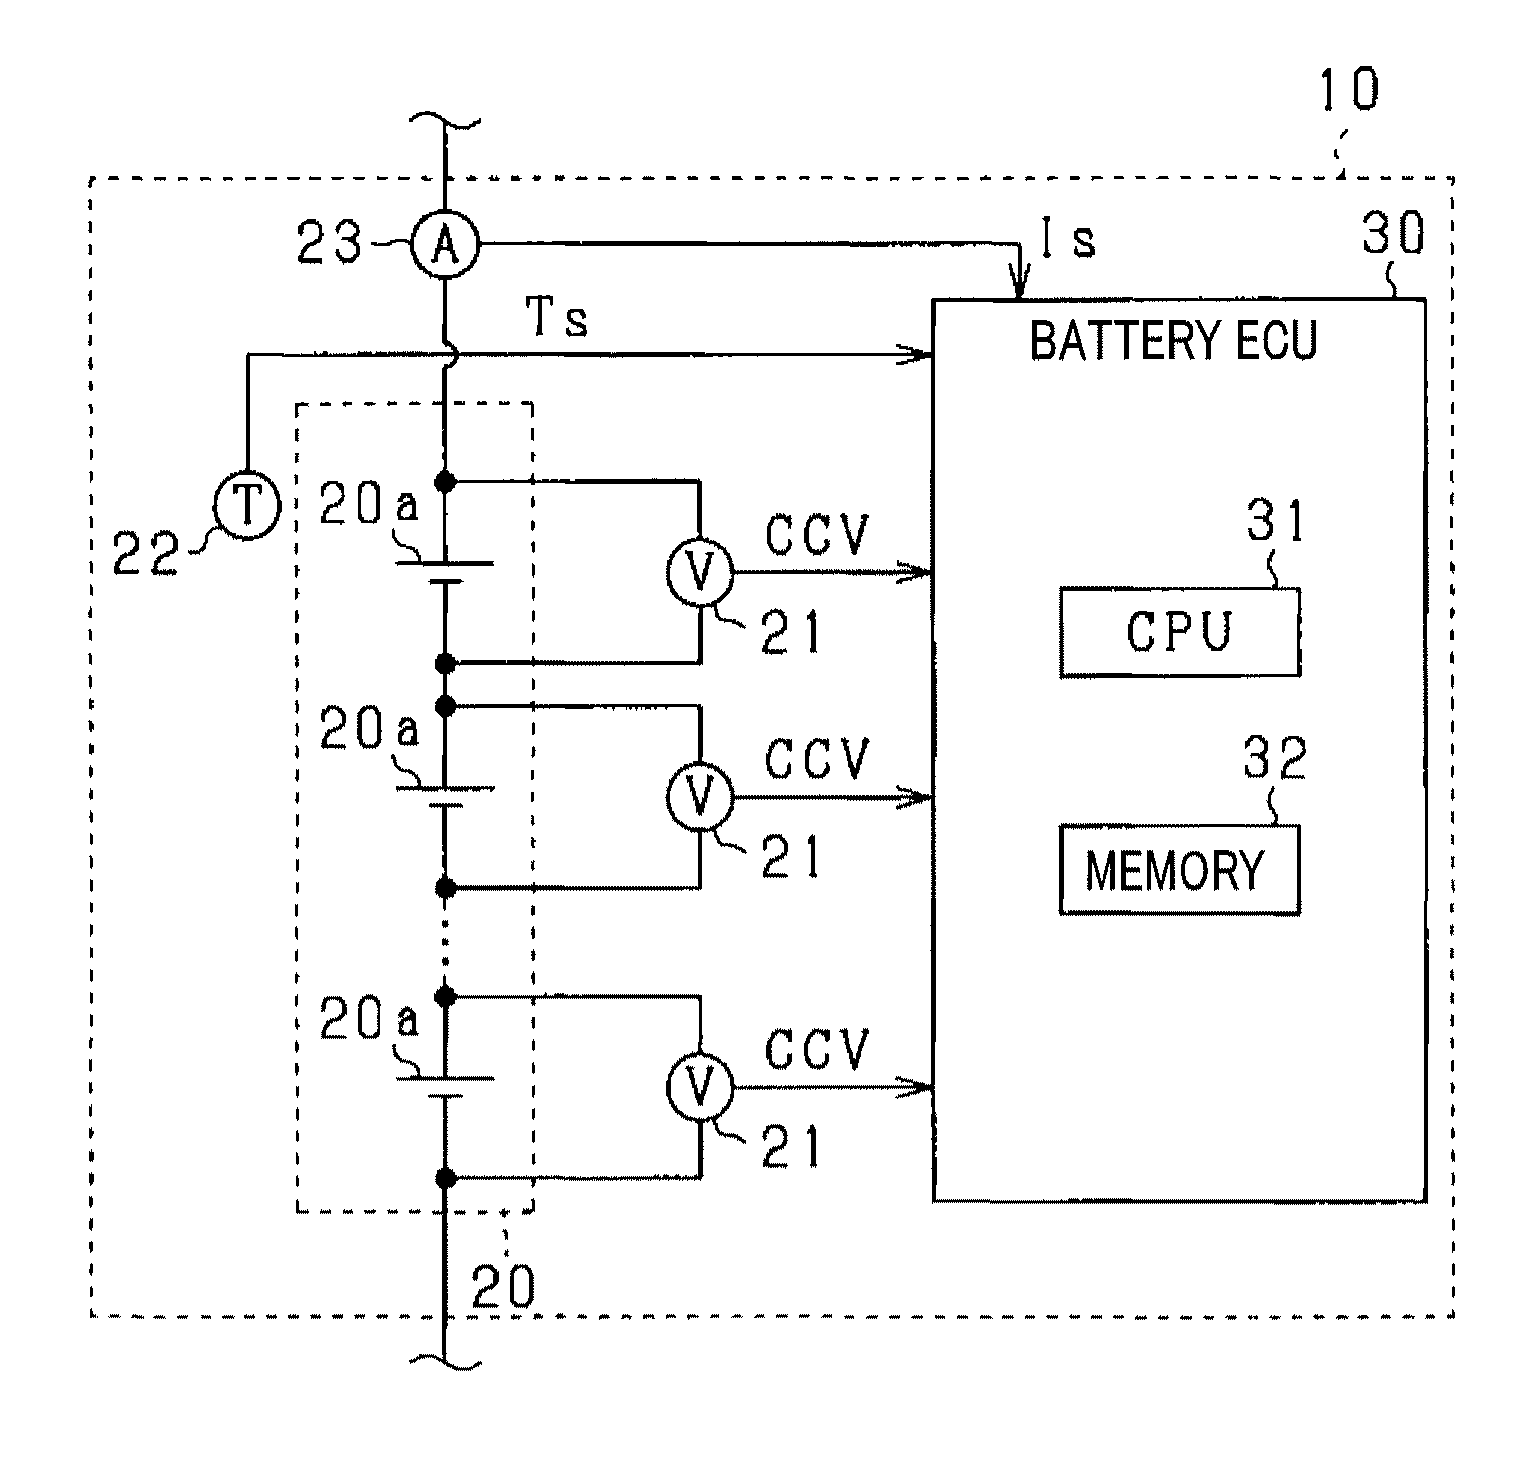 Battery state estimation apparatus